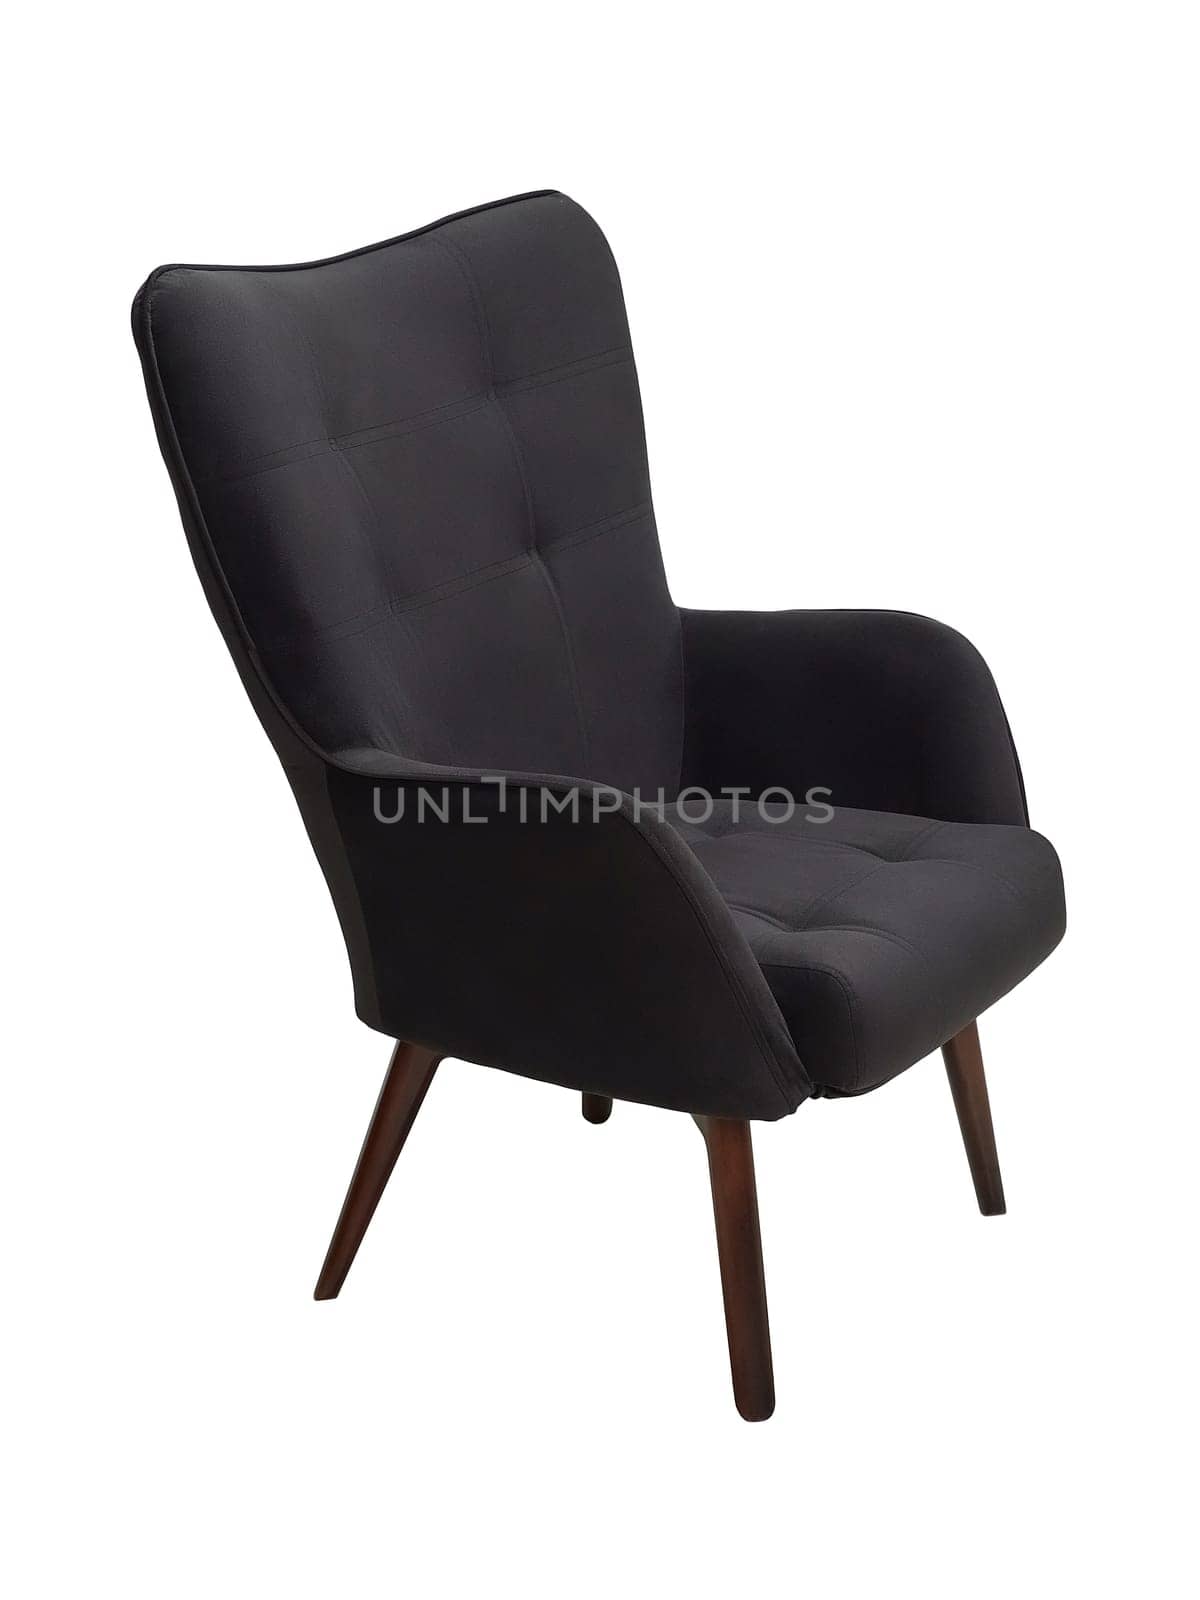 modern black fabric armchair with wooden legs isolated on white background, side view by artemzatsepilin